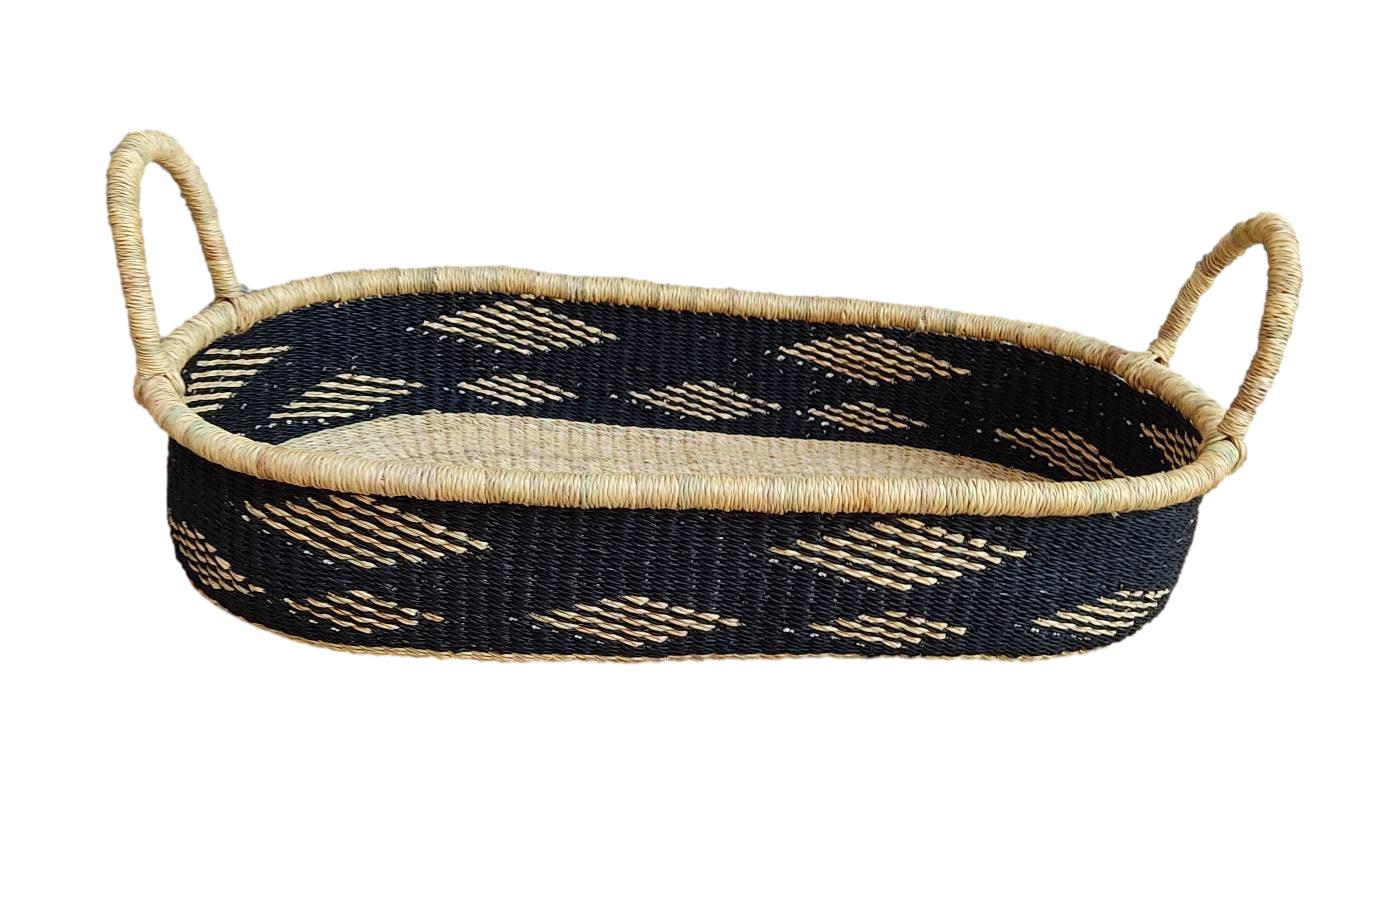 Baby Diaper Changing Table Basket | Moses Basket | Newborn Baby Woven Gift Basket - AfricanheritageGH